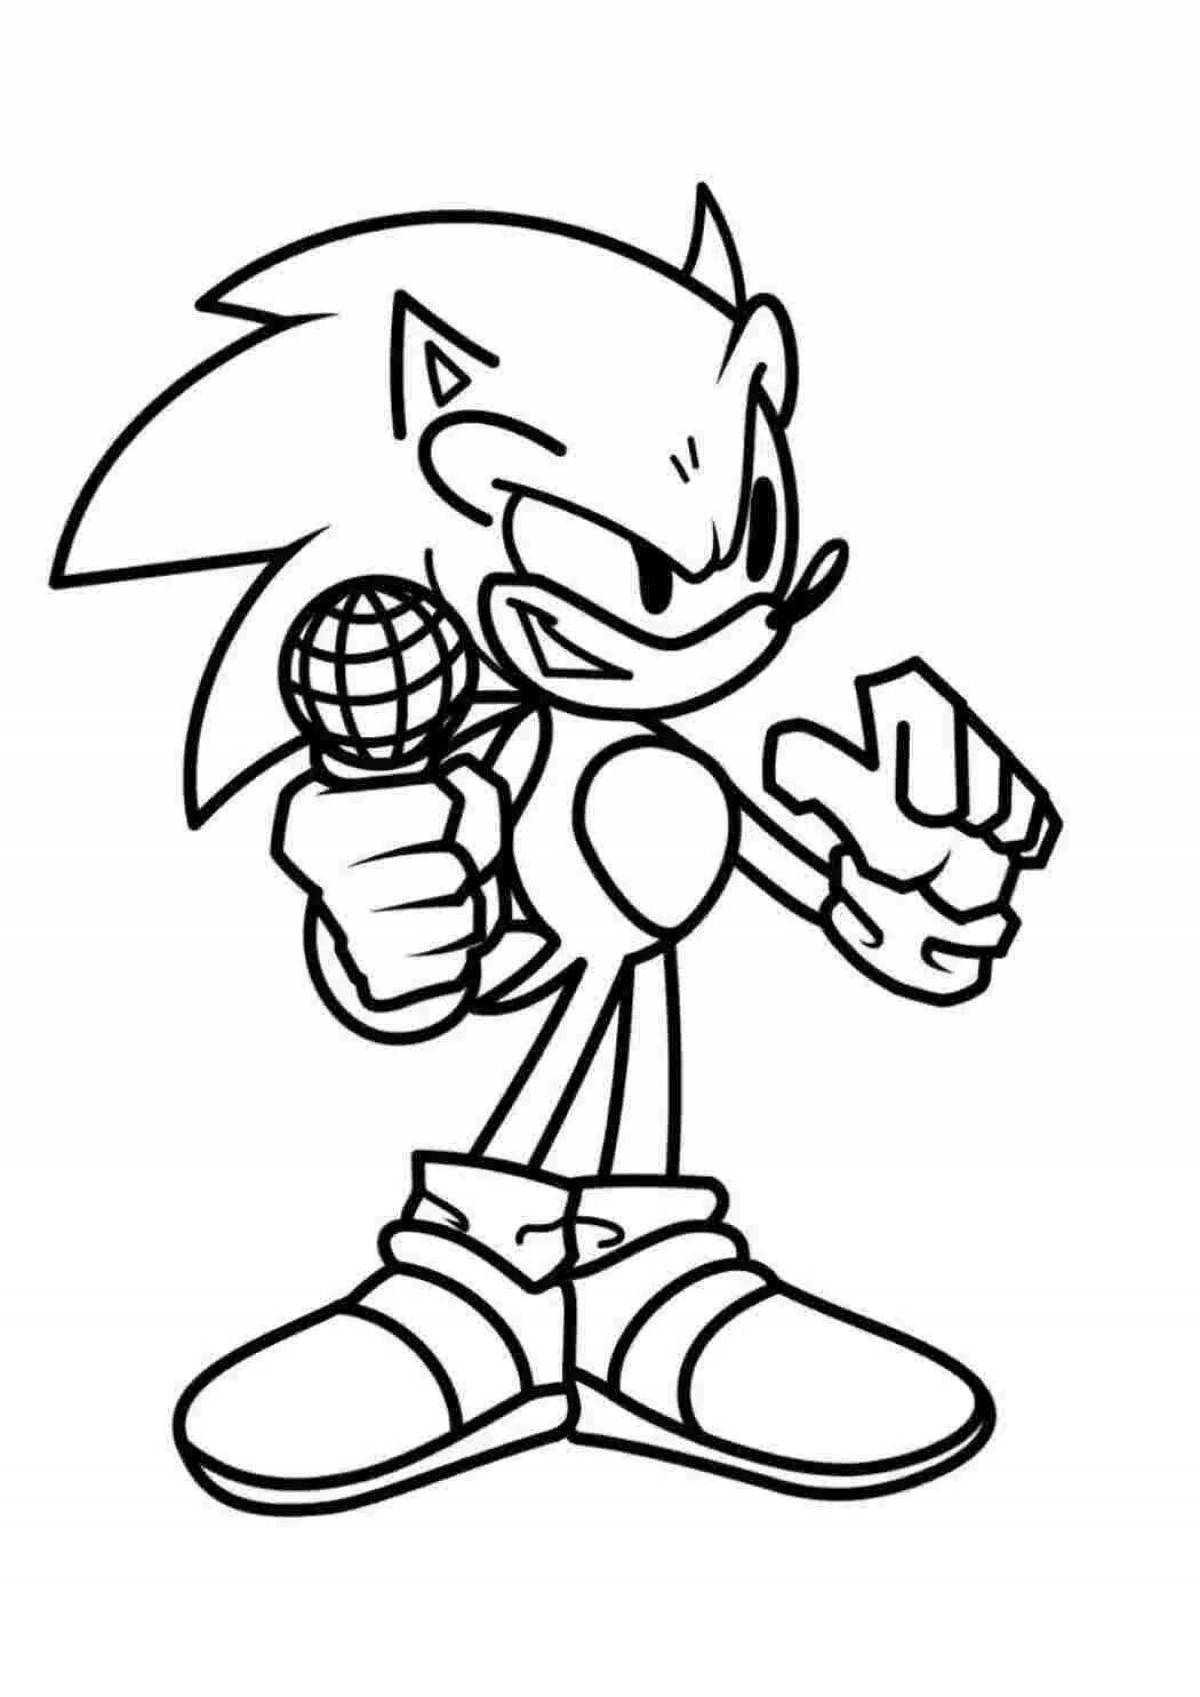 Exciting sonic rainbow coloring book